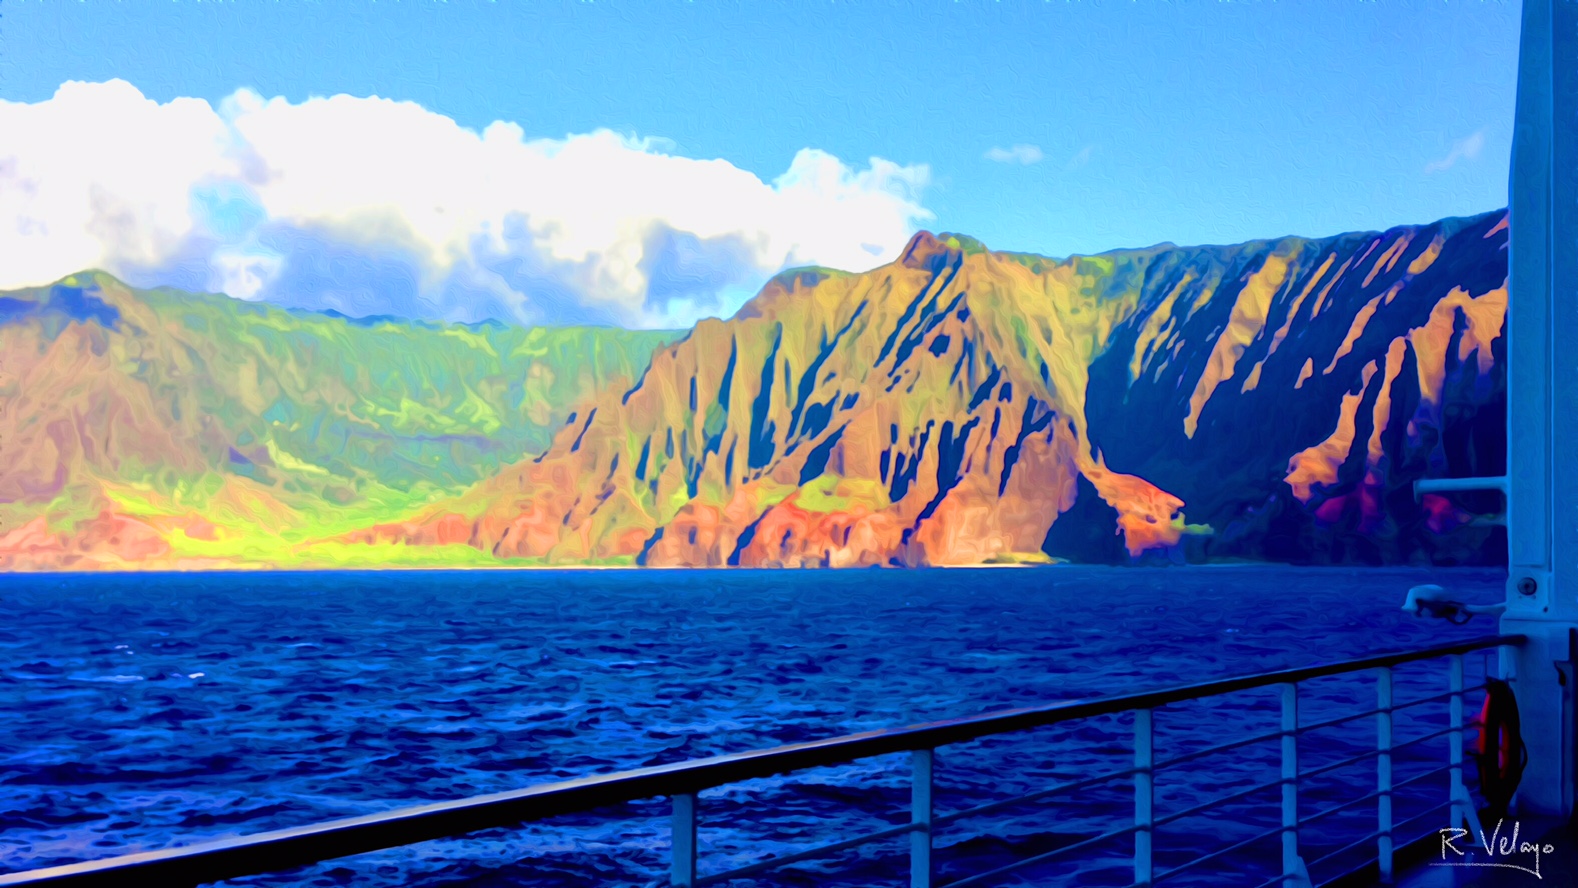 "VIEW OF NAPALI COAST FROM PRIDE OF AMERICA CRUISE" [Created: 9/12/2021]